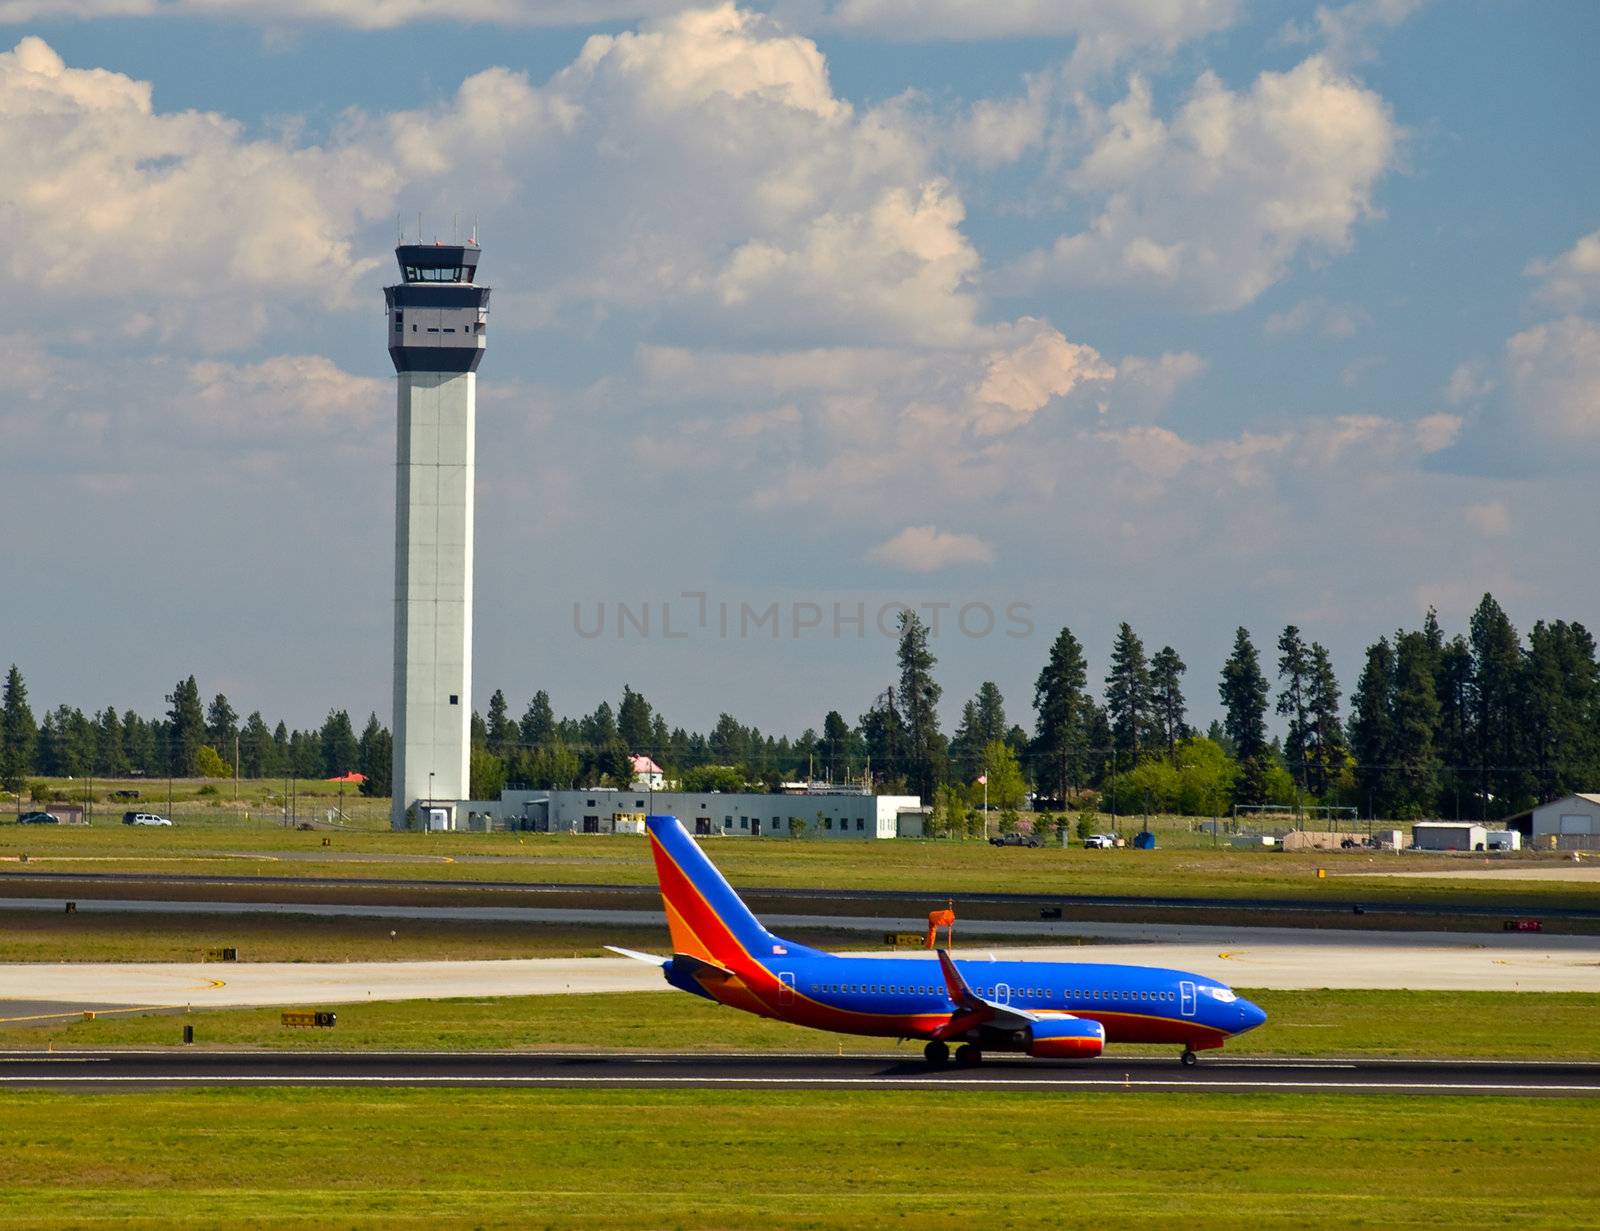 Air Traffic Control Tower and an Airplane on the Taxiway